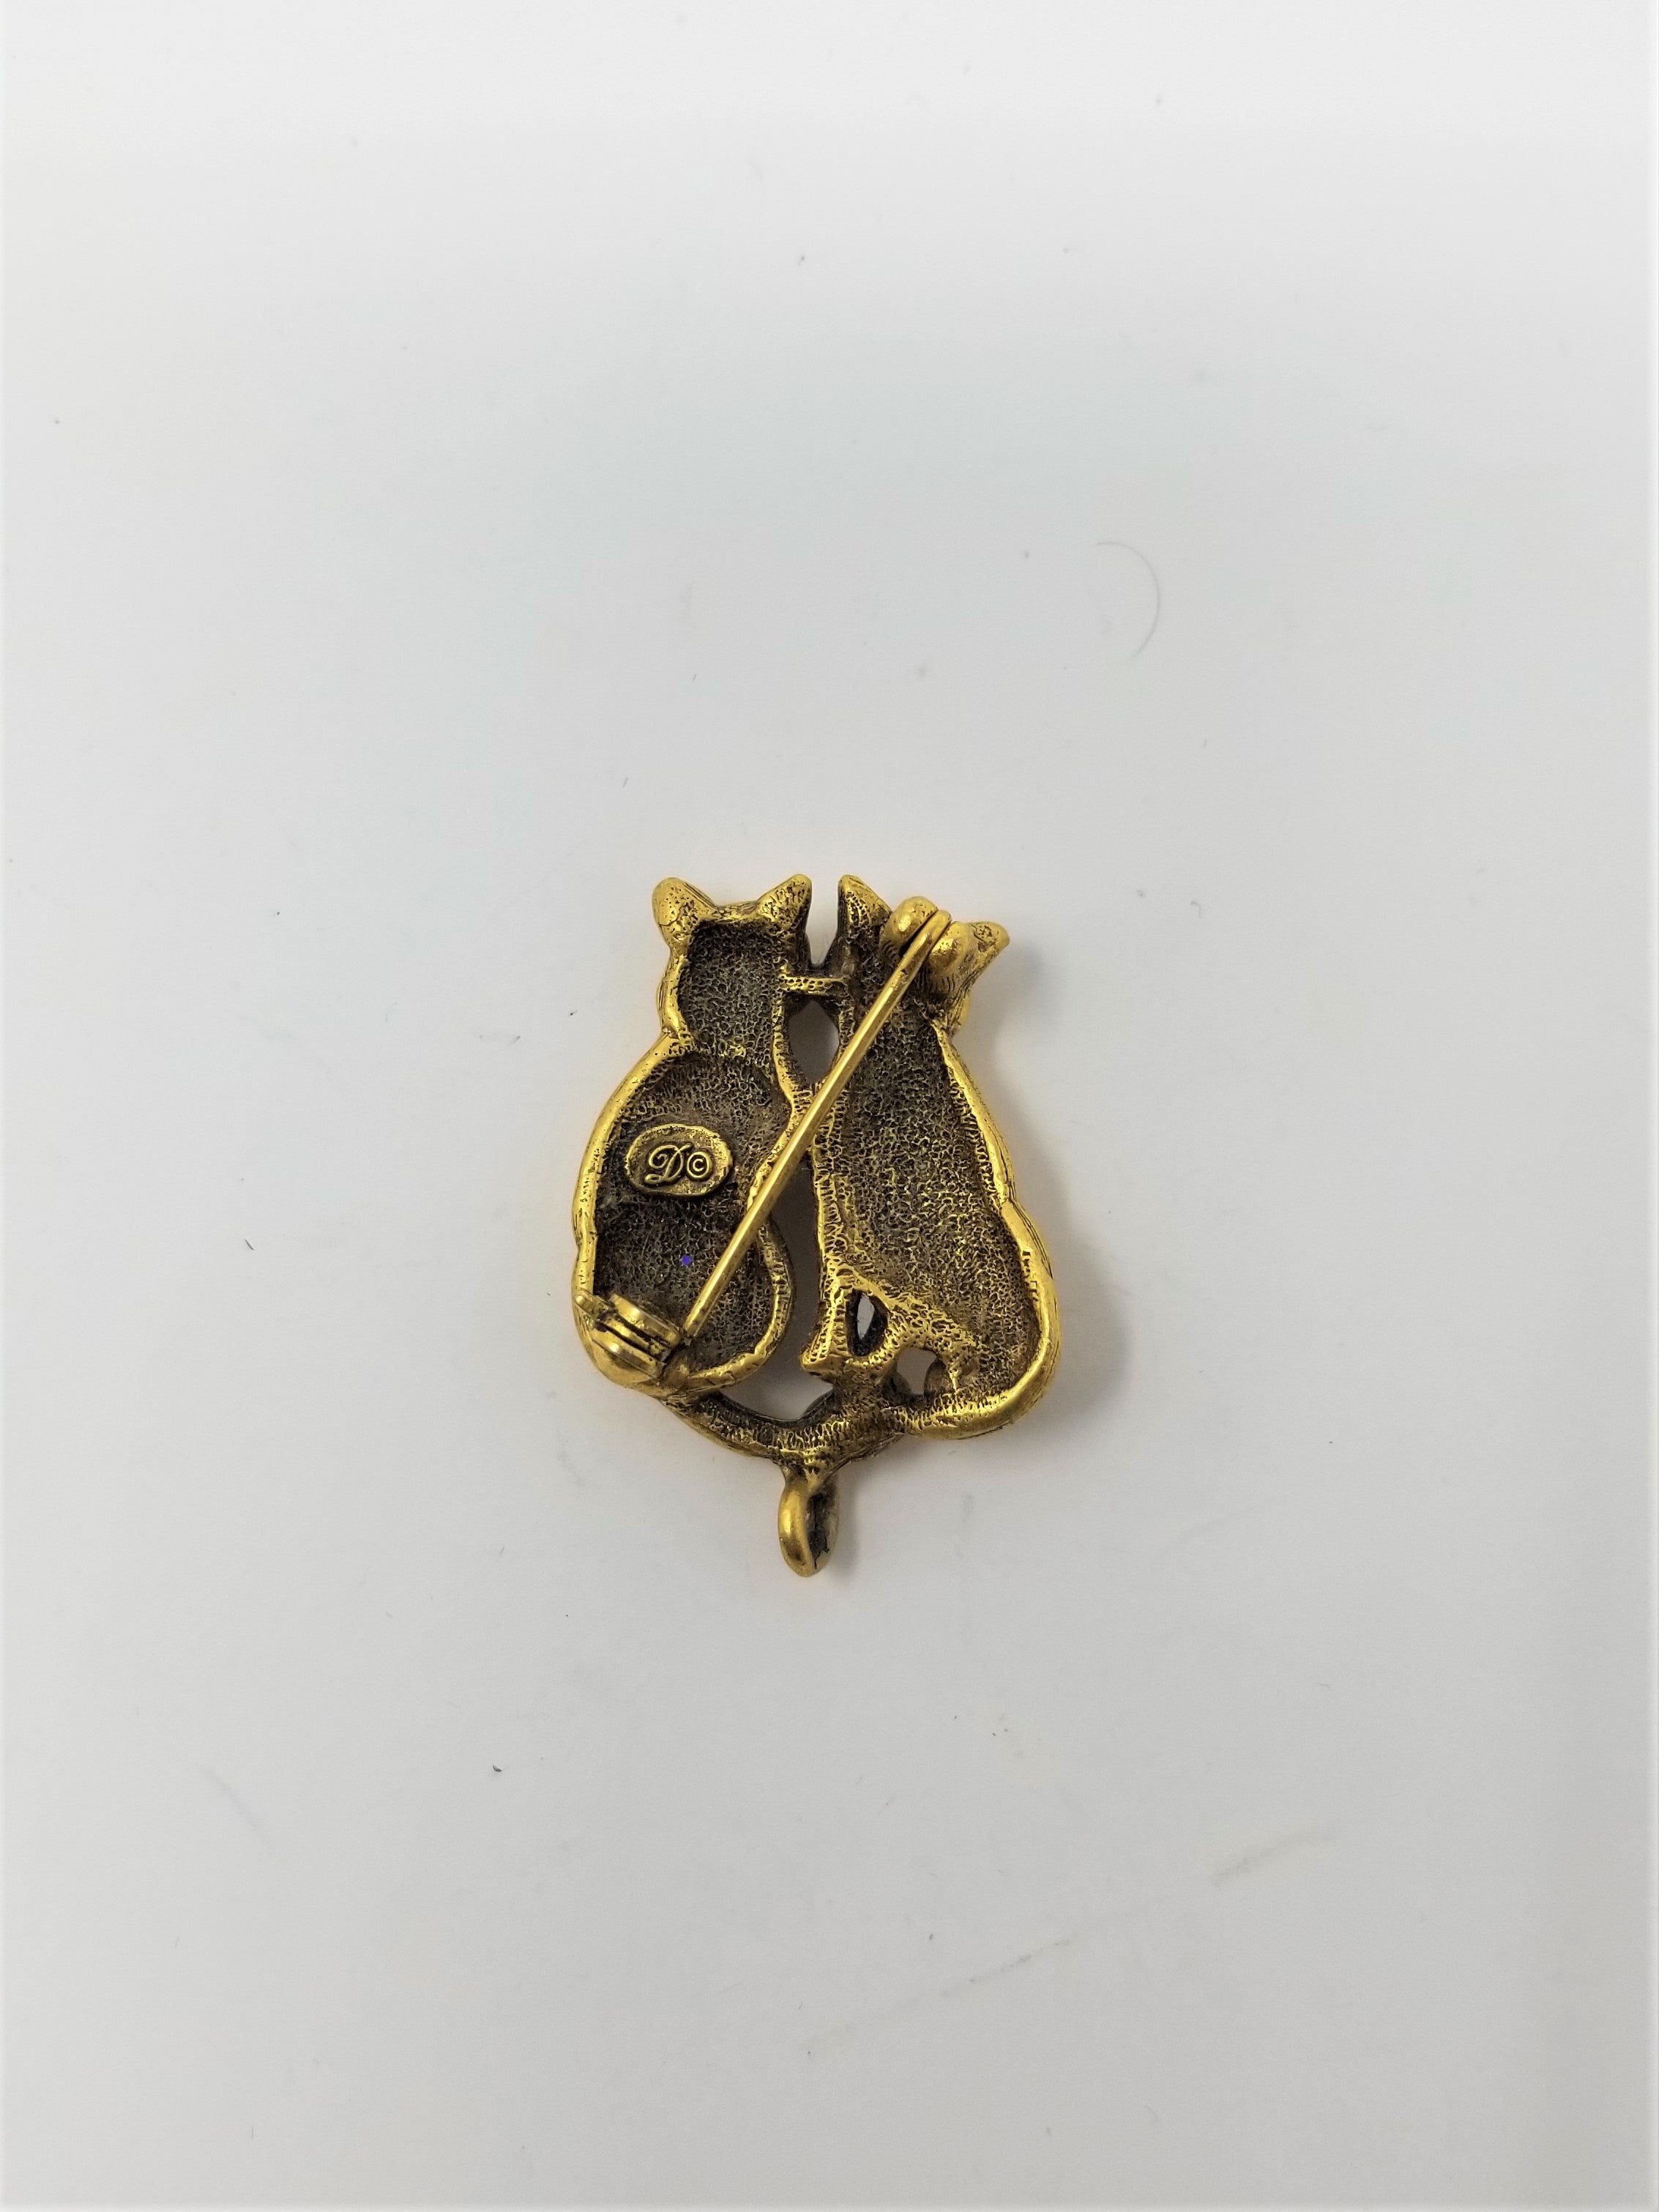 Two loving Cats Pin Gold Tone Small and Sweet